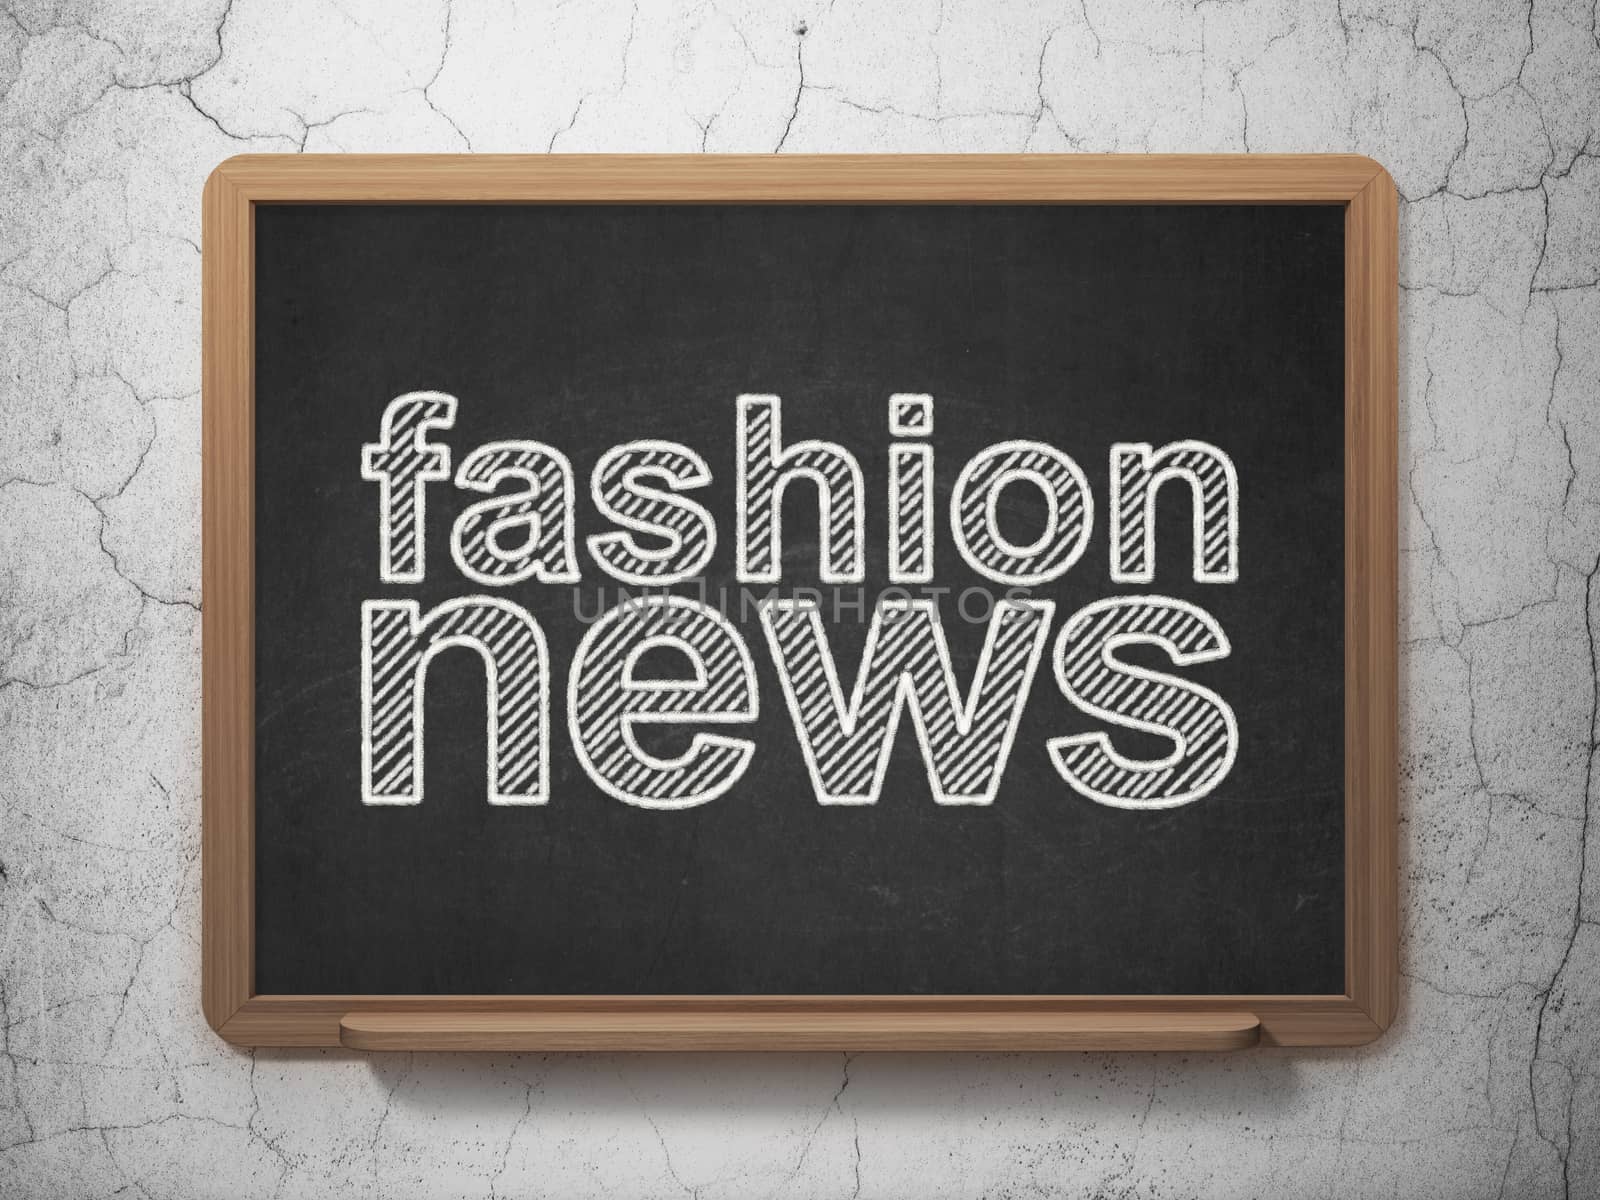 News concept: text Fashion News on Black chalkboard on grunge wall background, 3D rendering